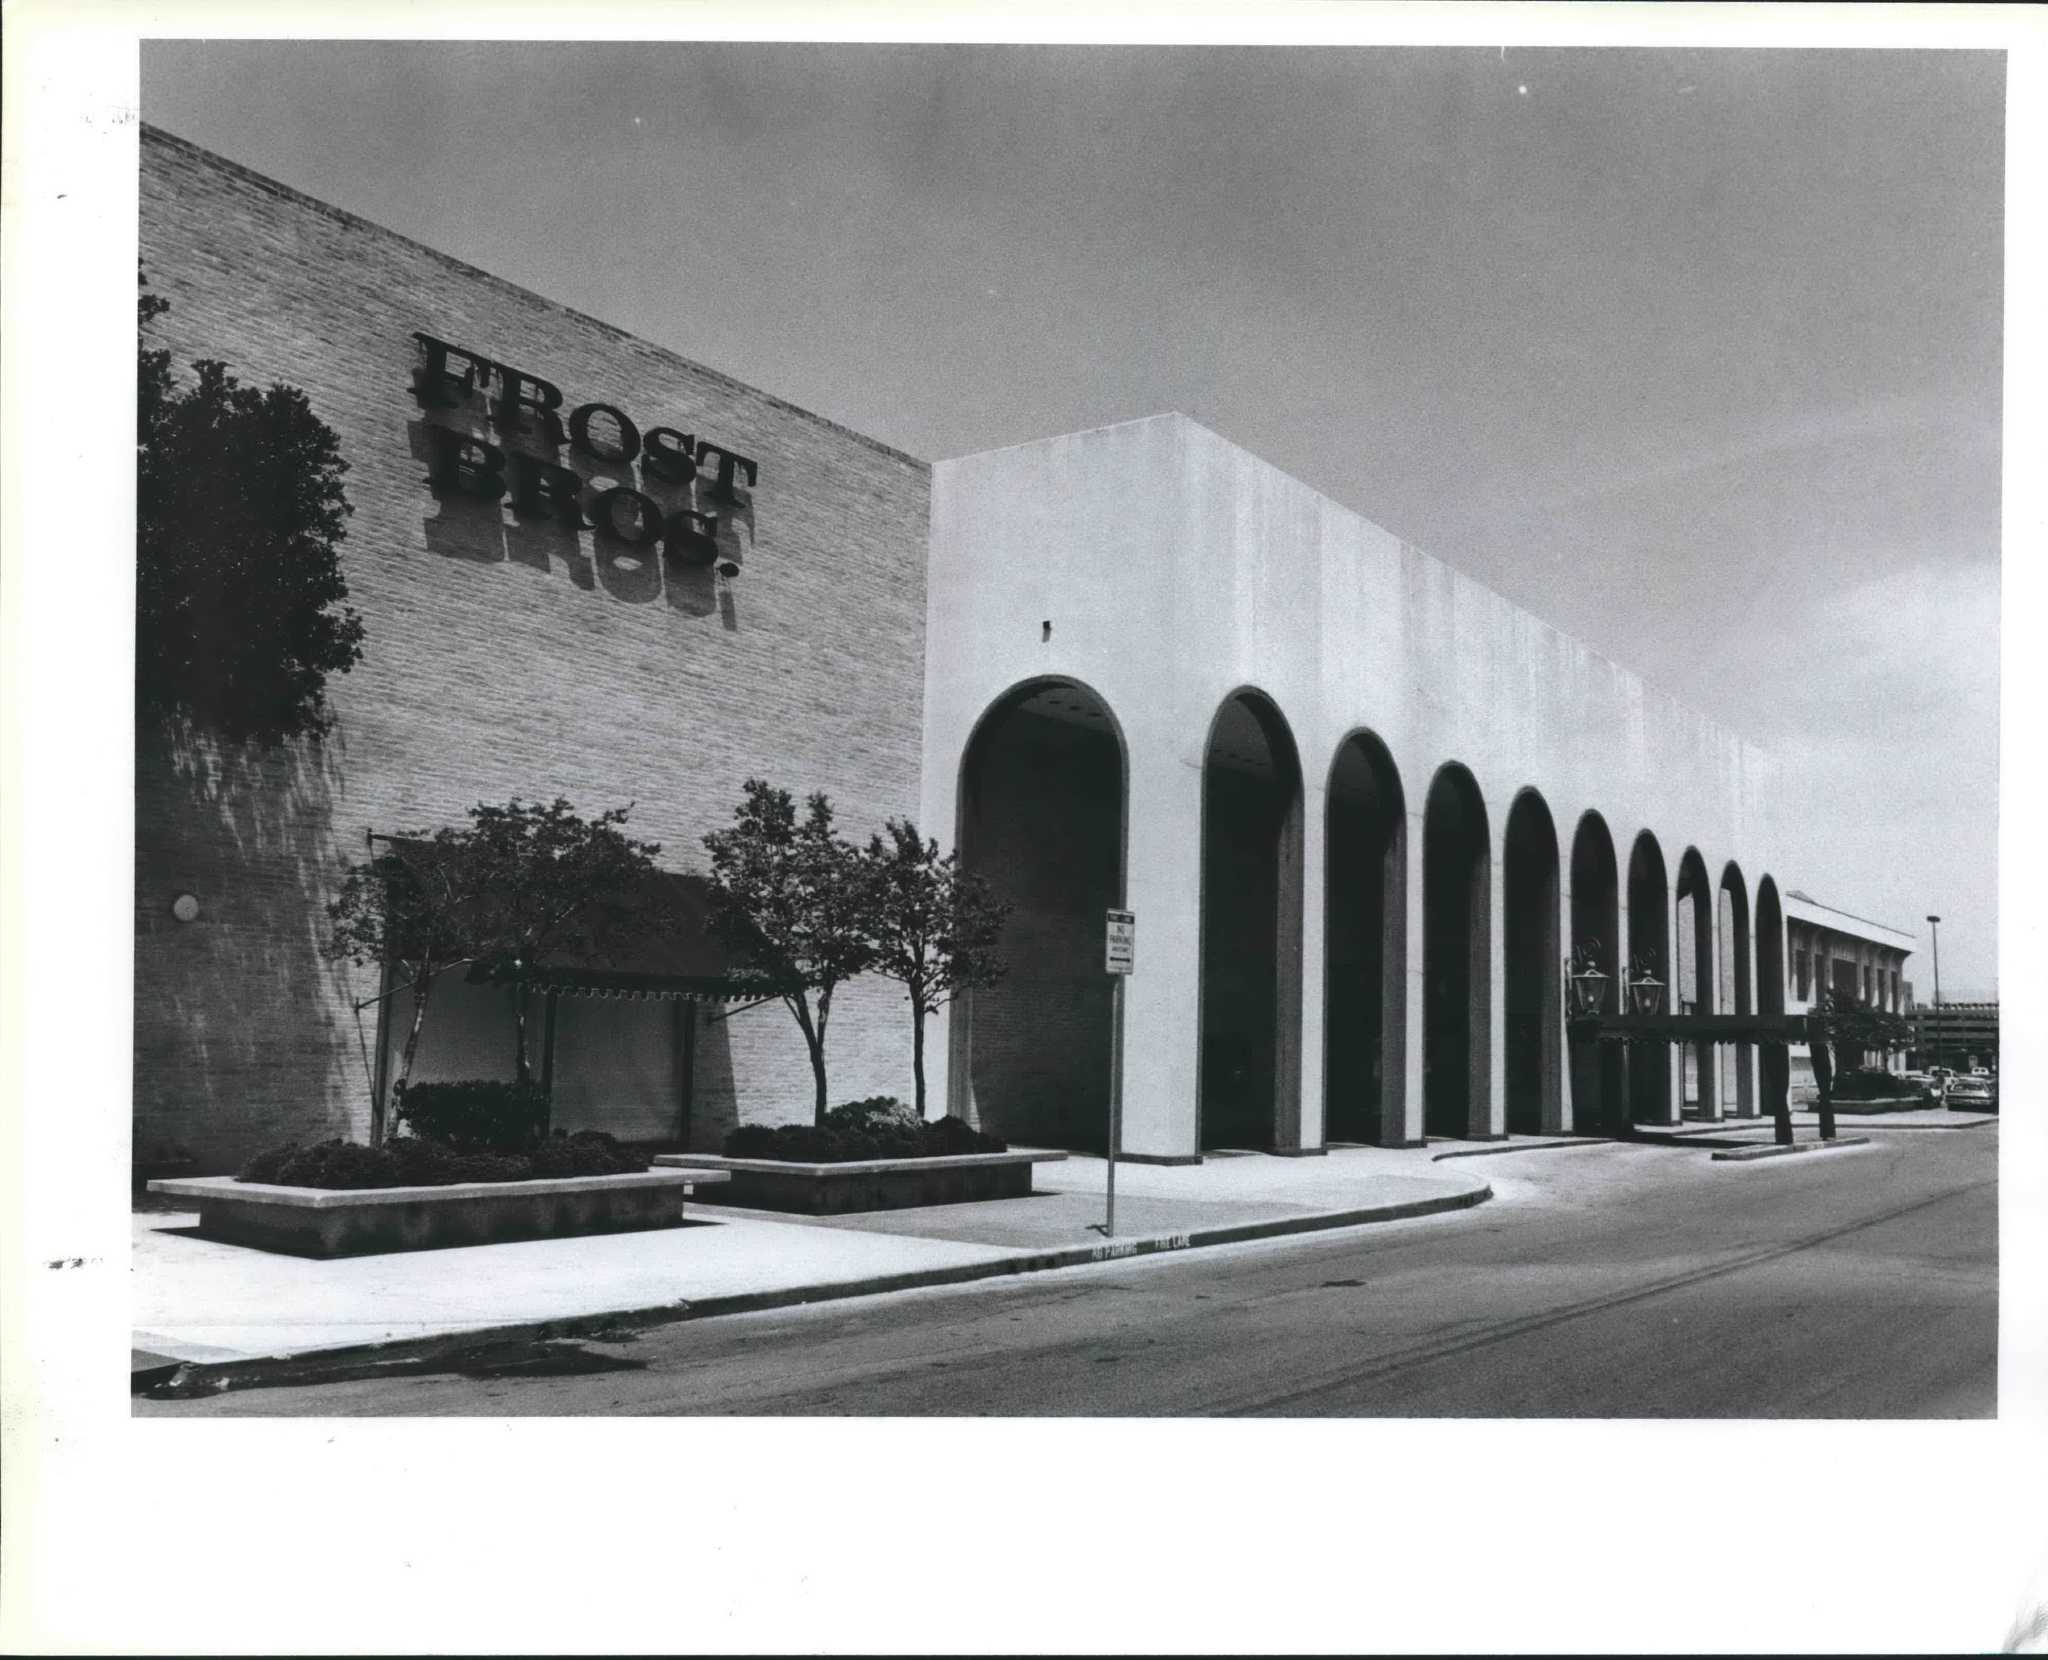 57 years ago this week, North Star Mall opened its doors to the delight of  San Antonians